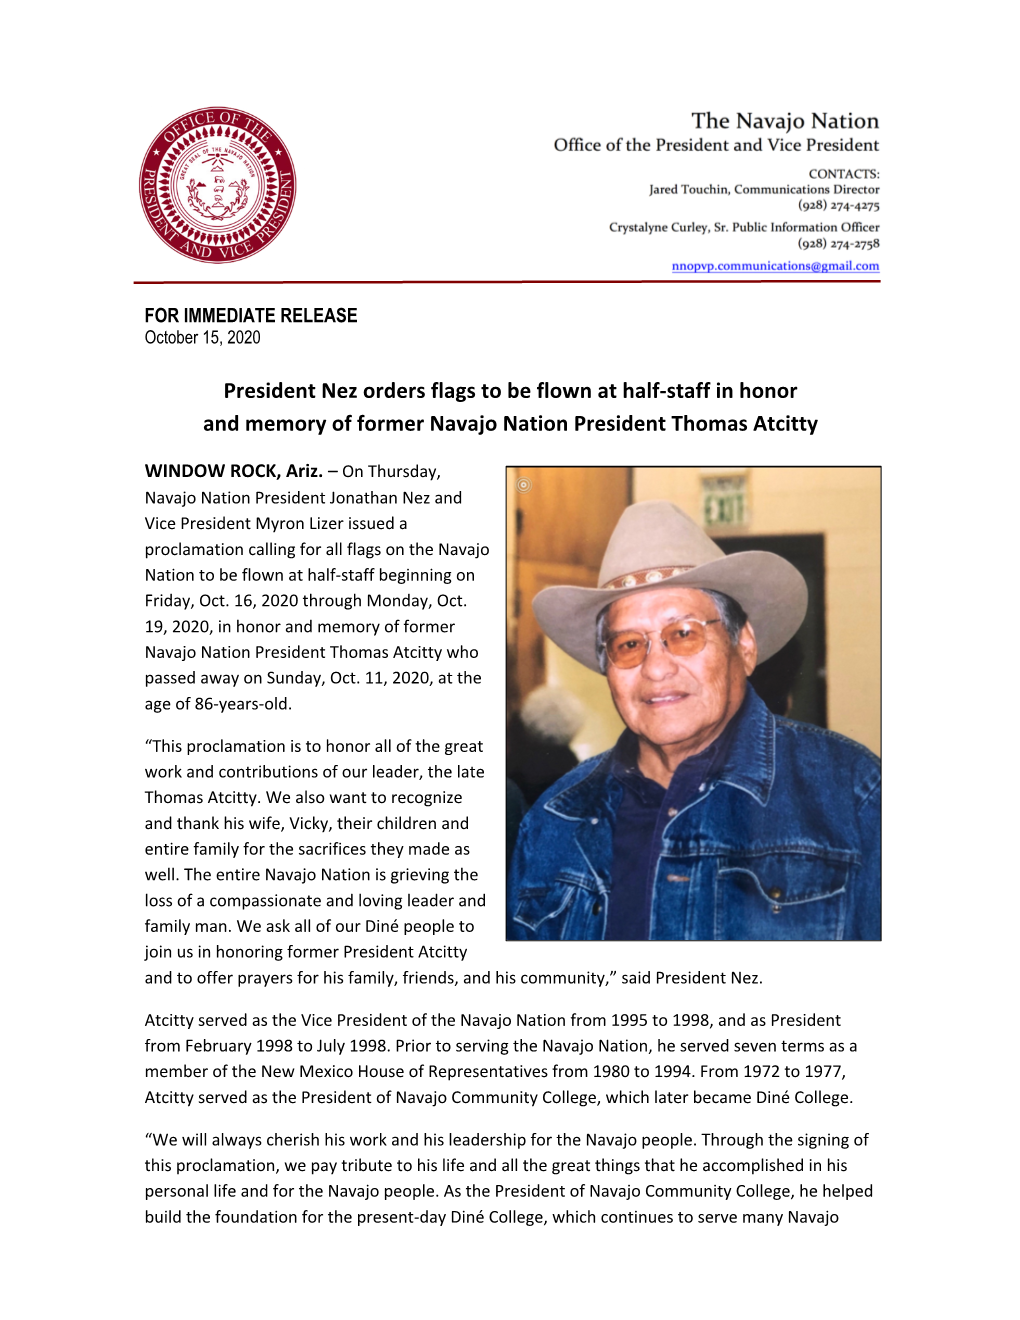 President Nez Orders Flags to Be Flown at Half-Staff in Honor and Memory of Former Navajo Nation President Thomas Atcitty